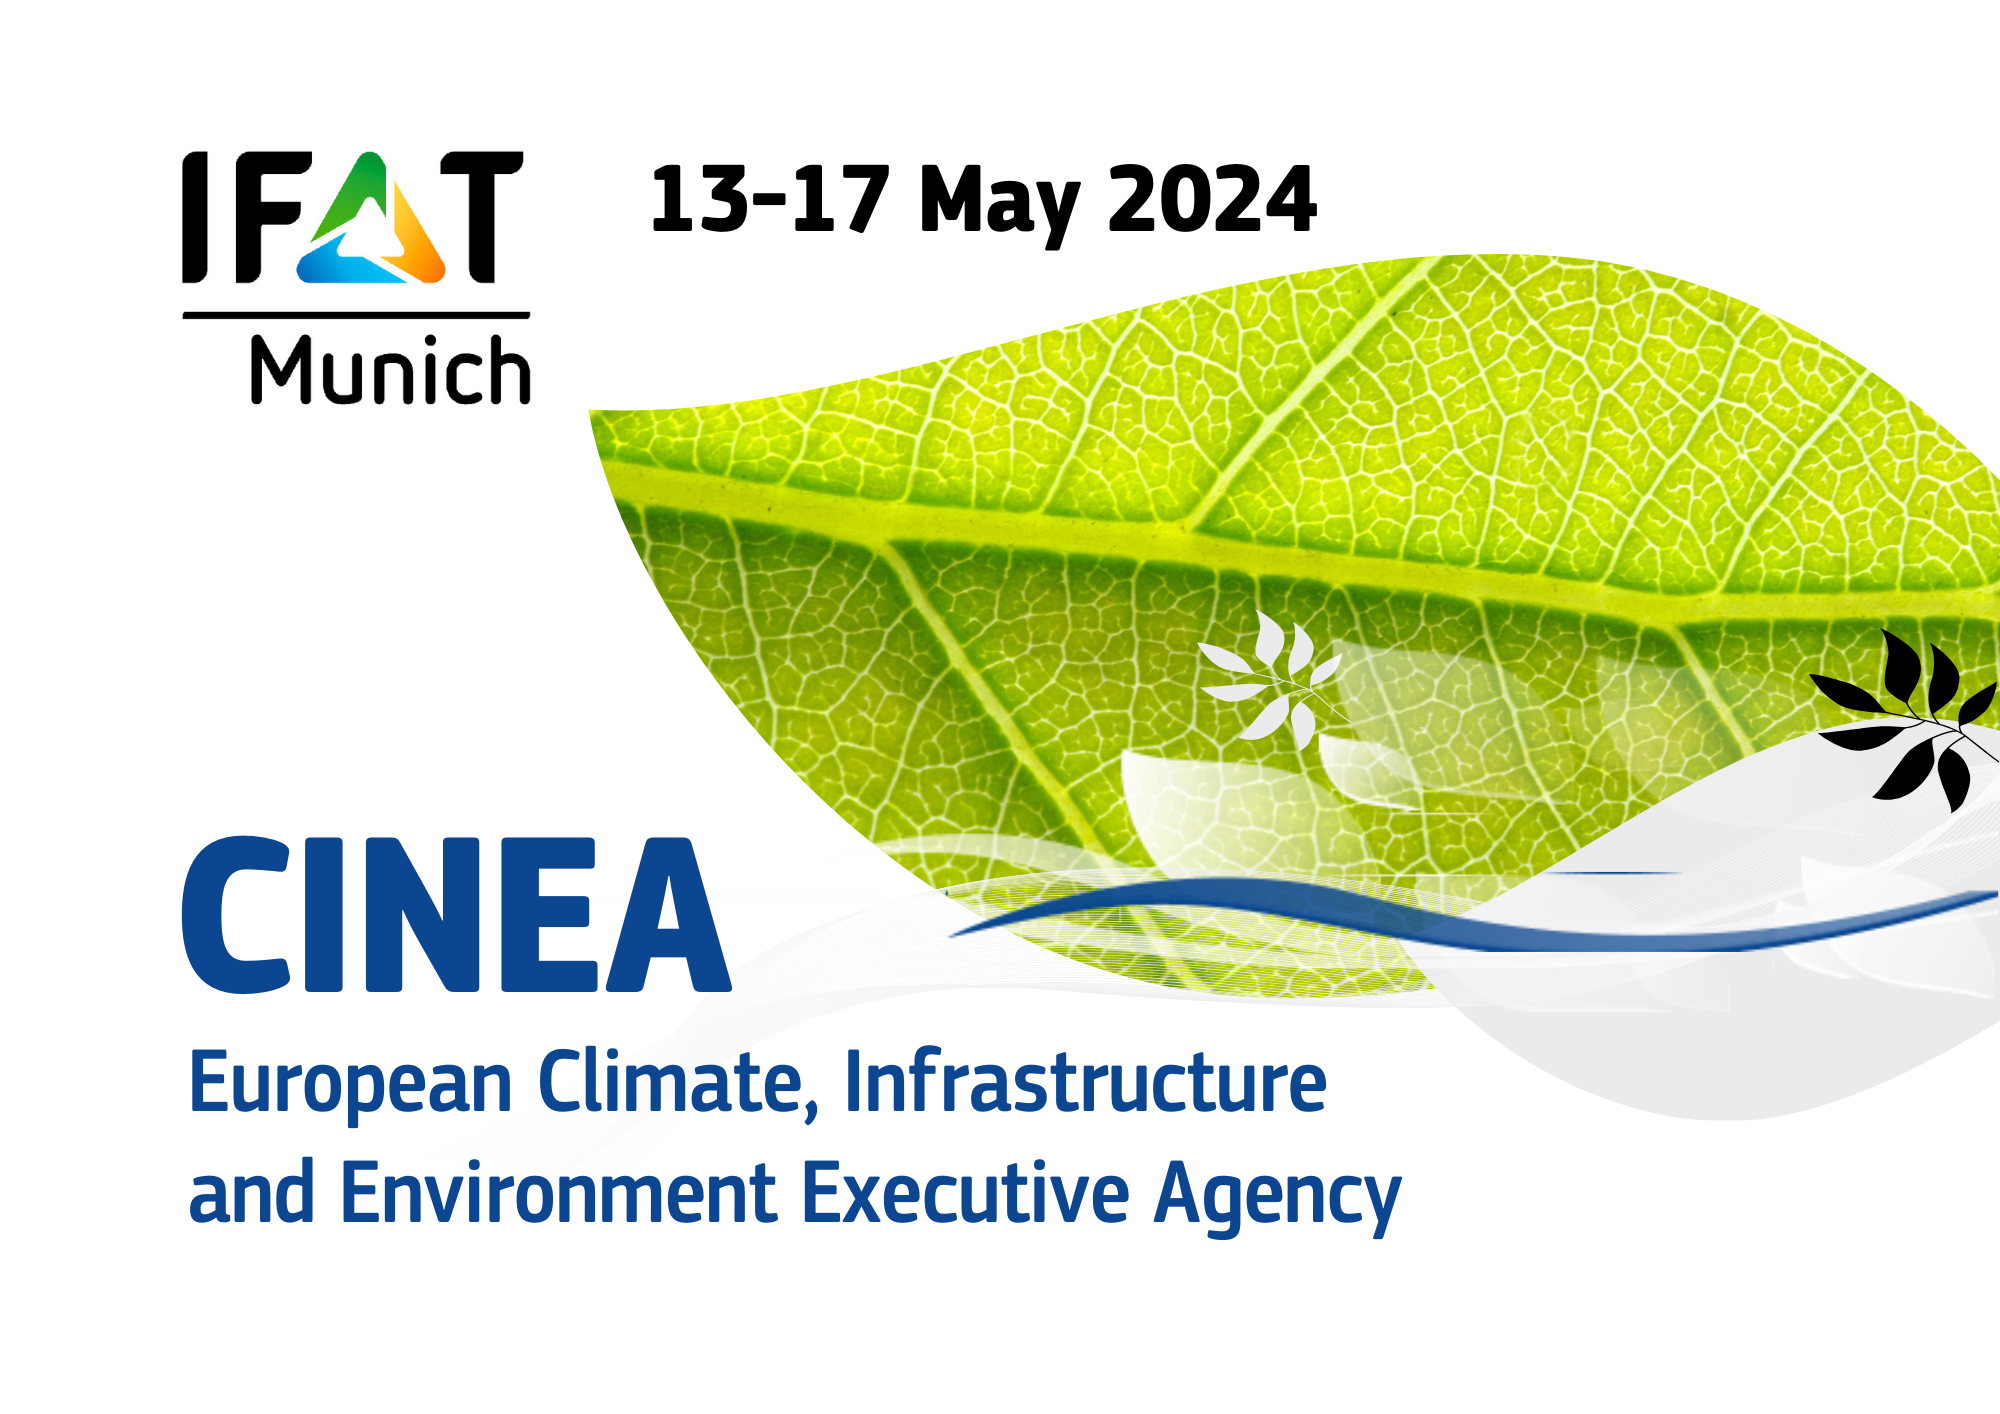 Meet CINEA at IFAT from 13 to 17 May in Munich